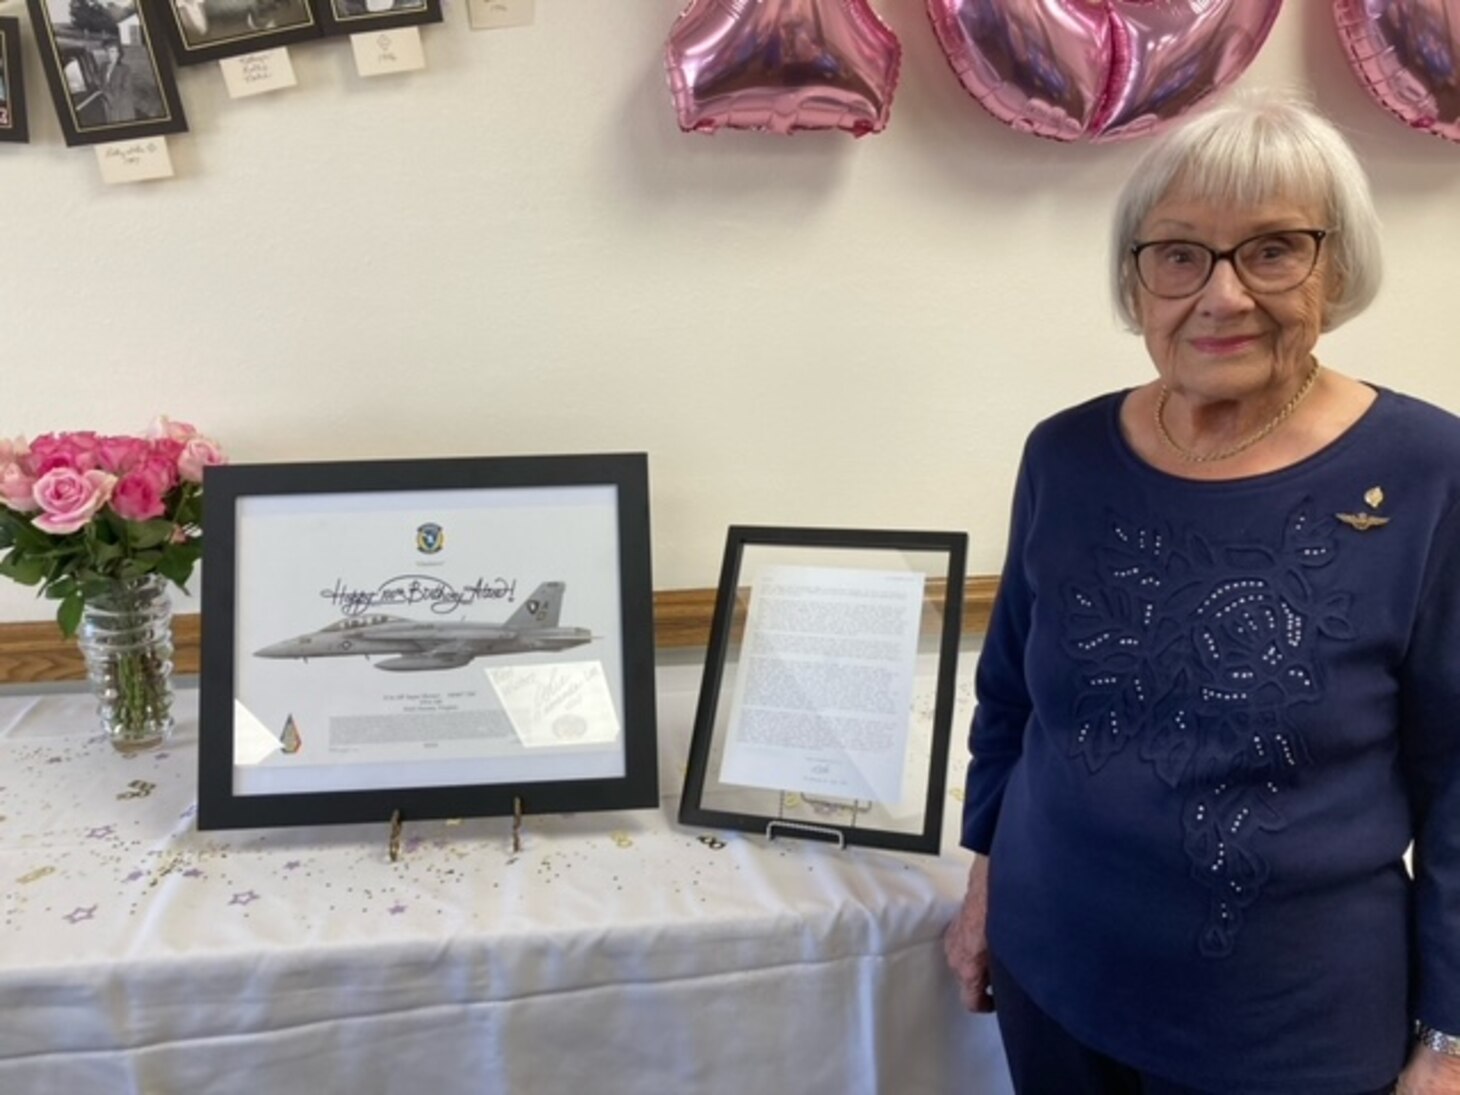 Alice Starnes poses for a photo with mementos presented to her during a celebration of her 100th birthday.